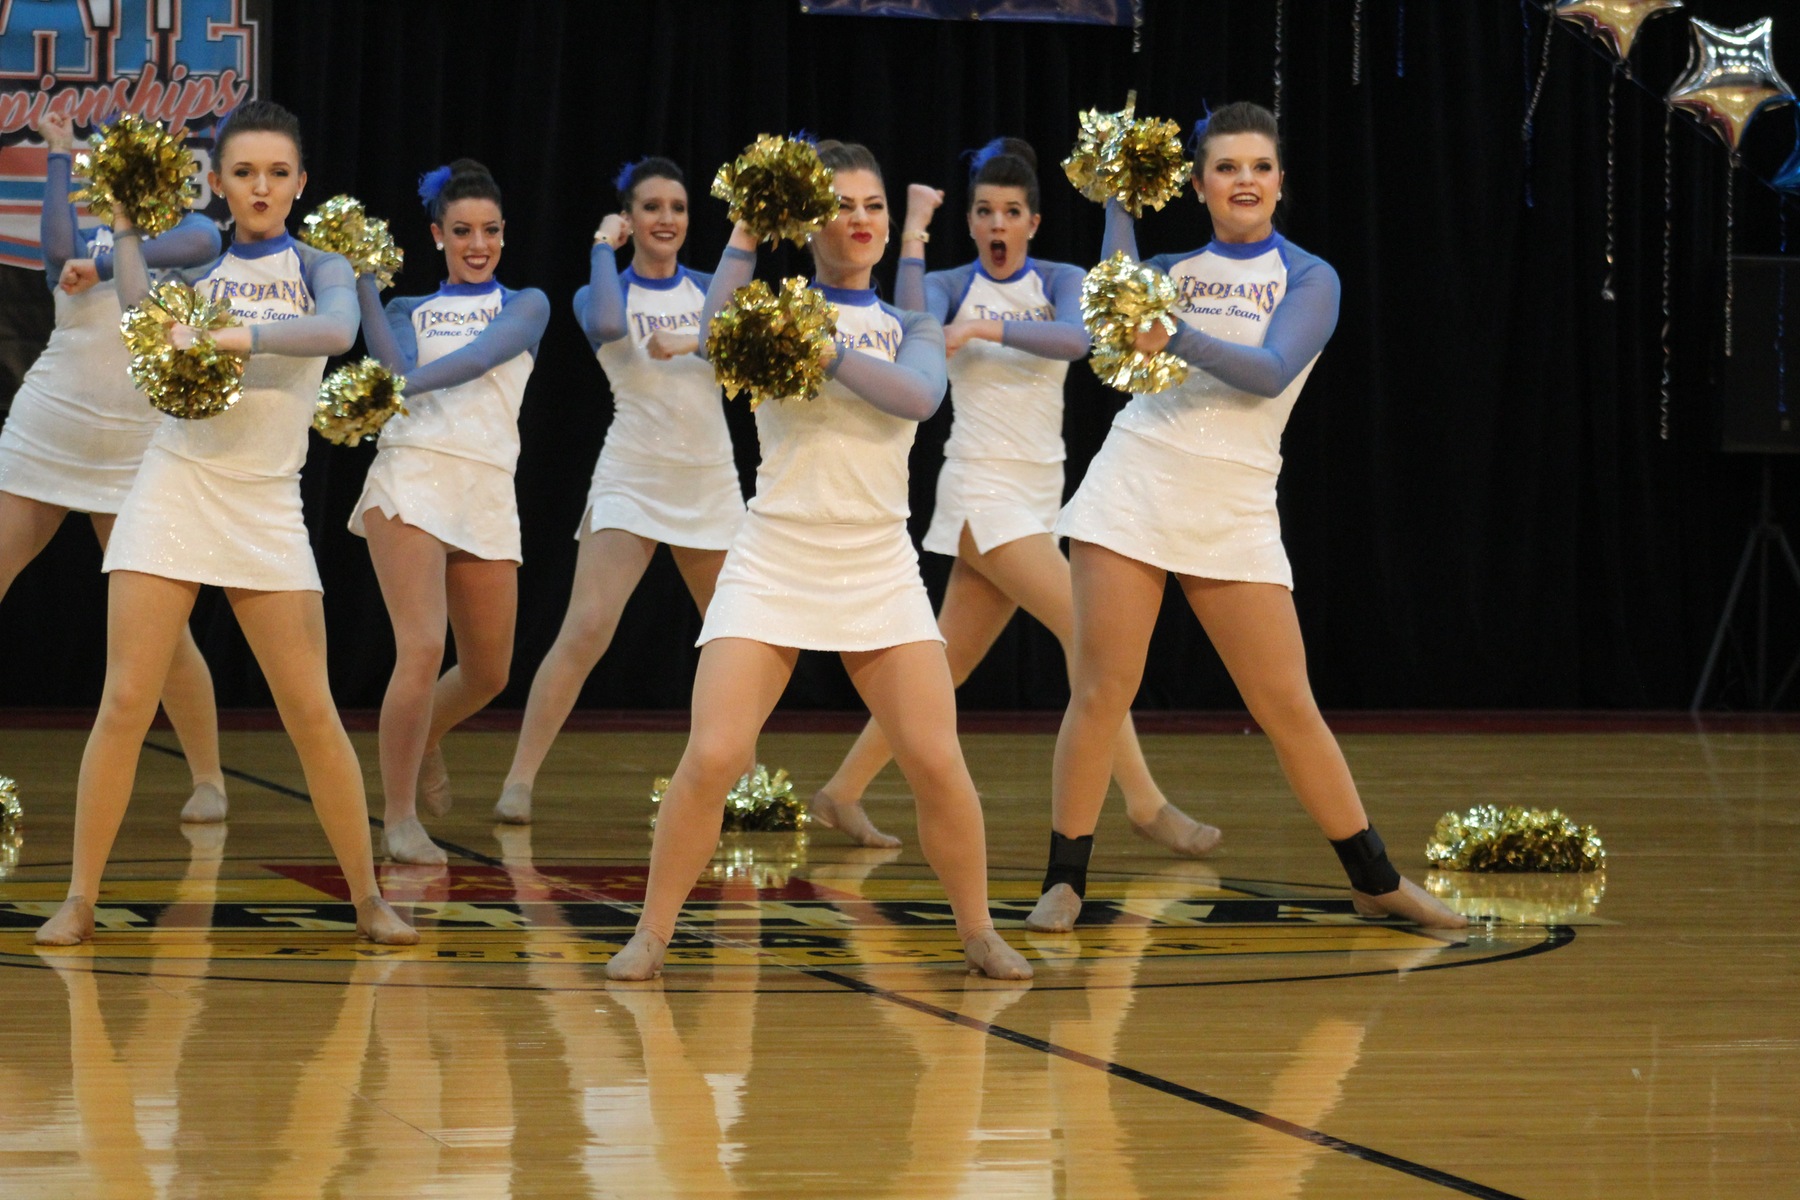 The NIACC Dance Team placed second in Pom at the state dance competition Friday in Des Moines.